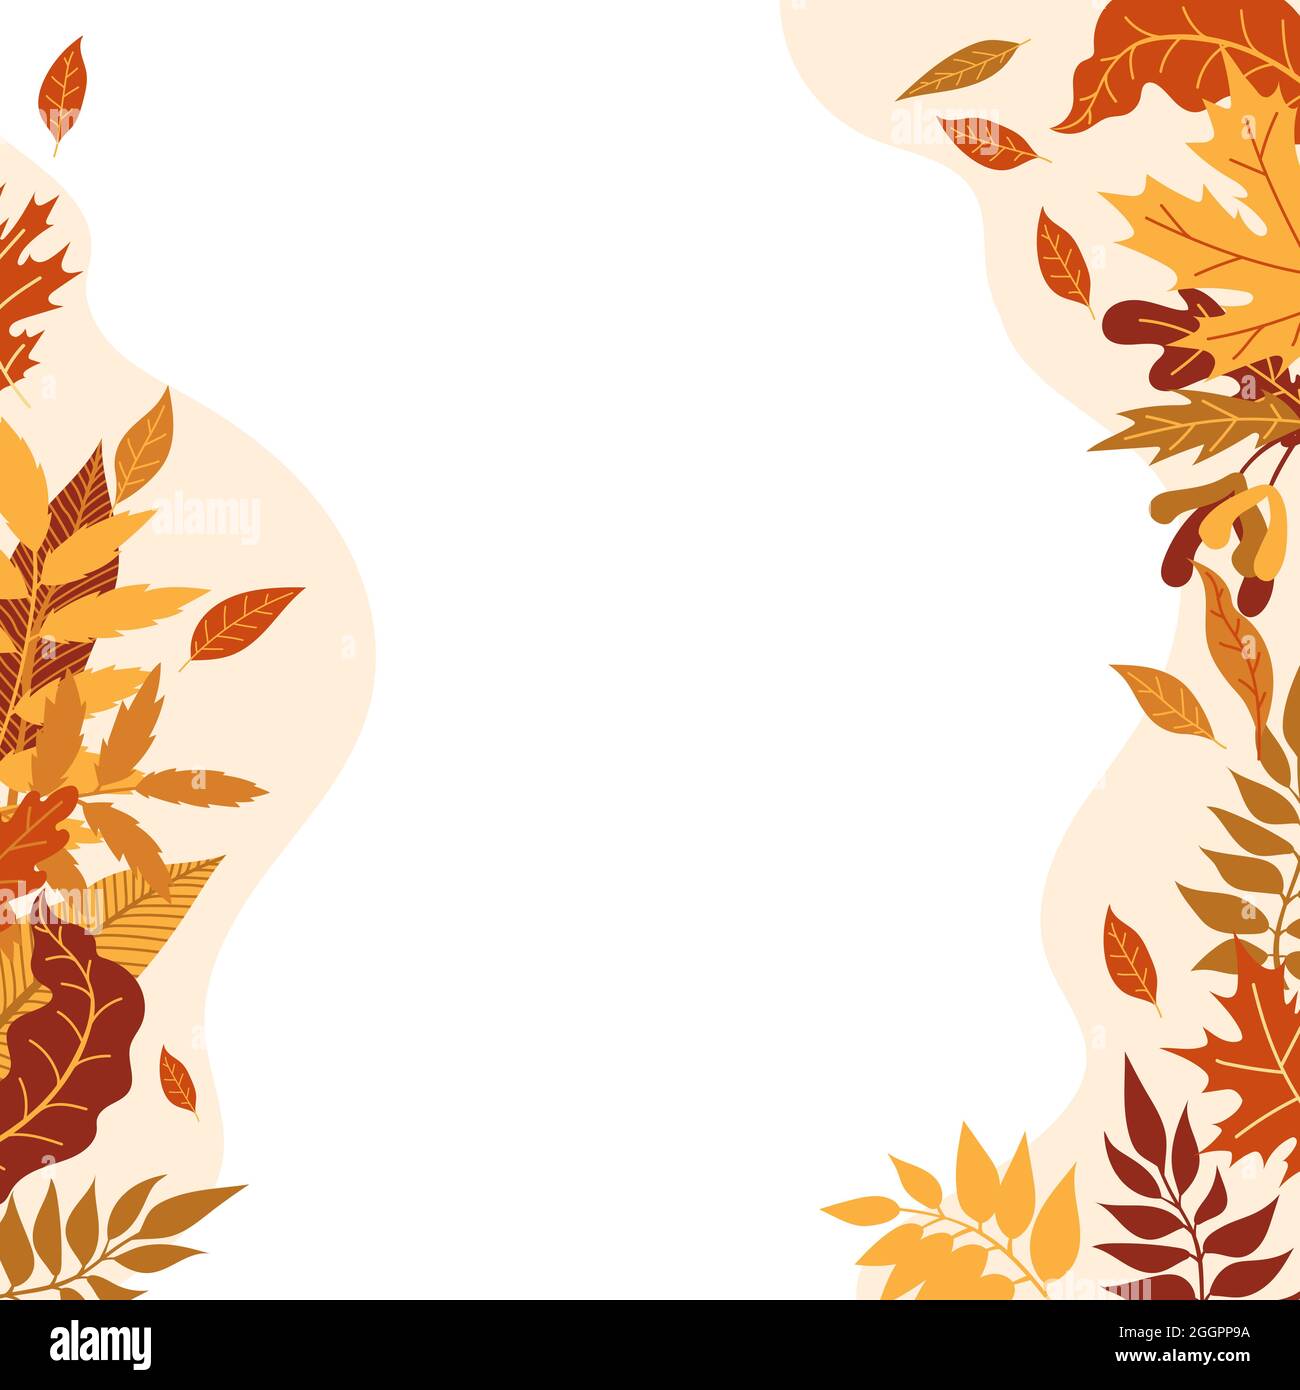 Orange autumn leaves vector illustration. Autumn Halloween frame with leaves, graphic icon or print isolated on white background Stock Vector